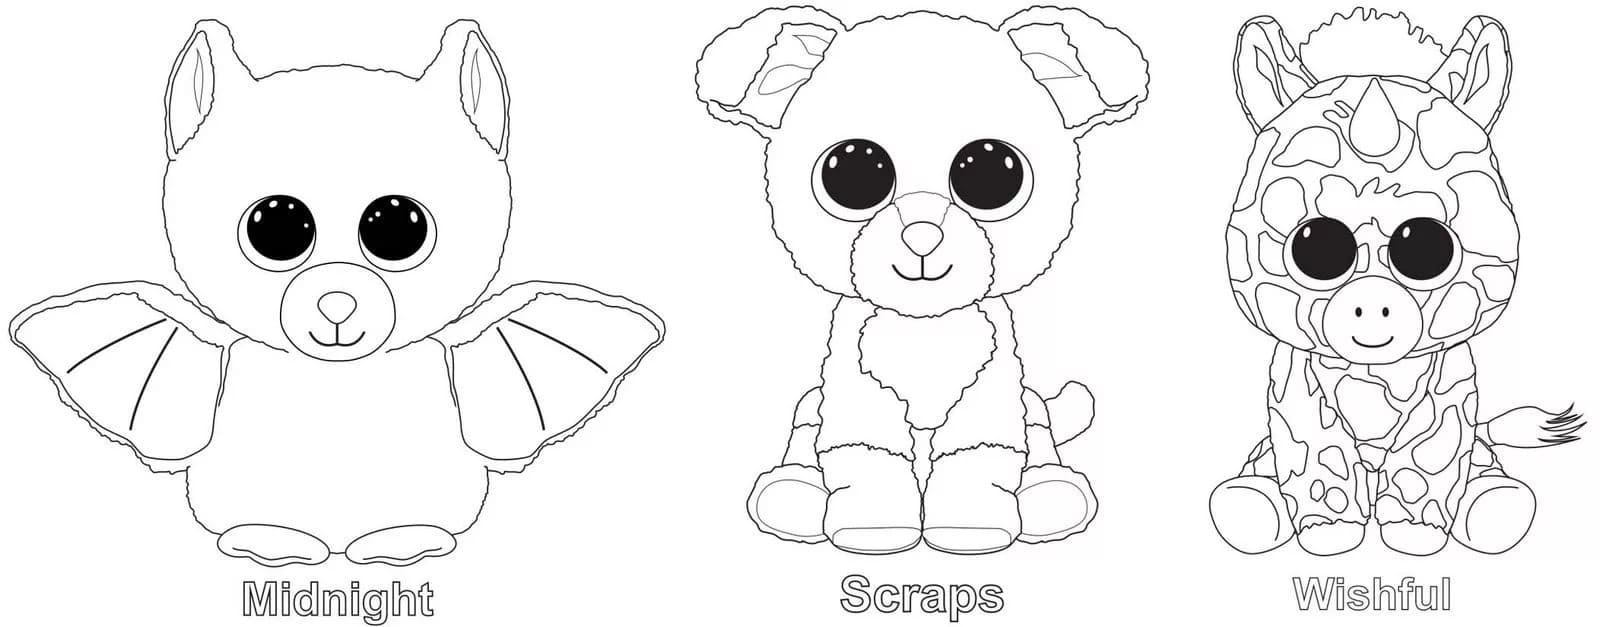 Beanie Boos Coloring Pages | 35 images Free Printable